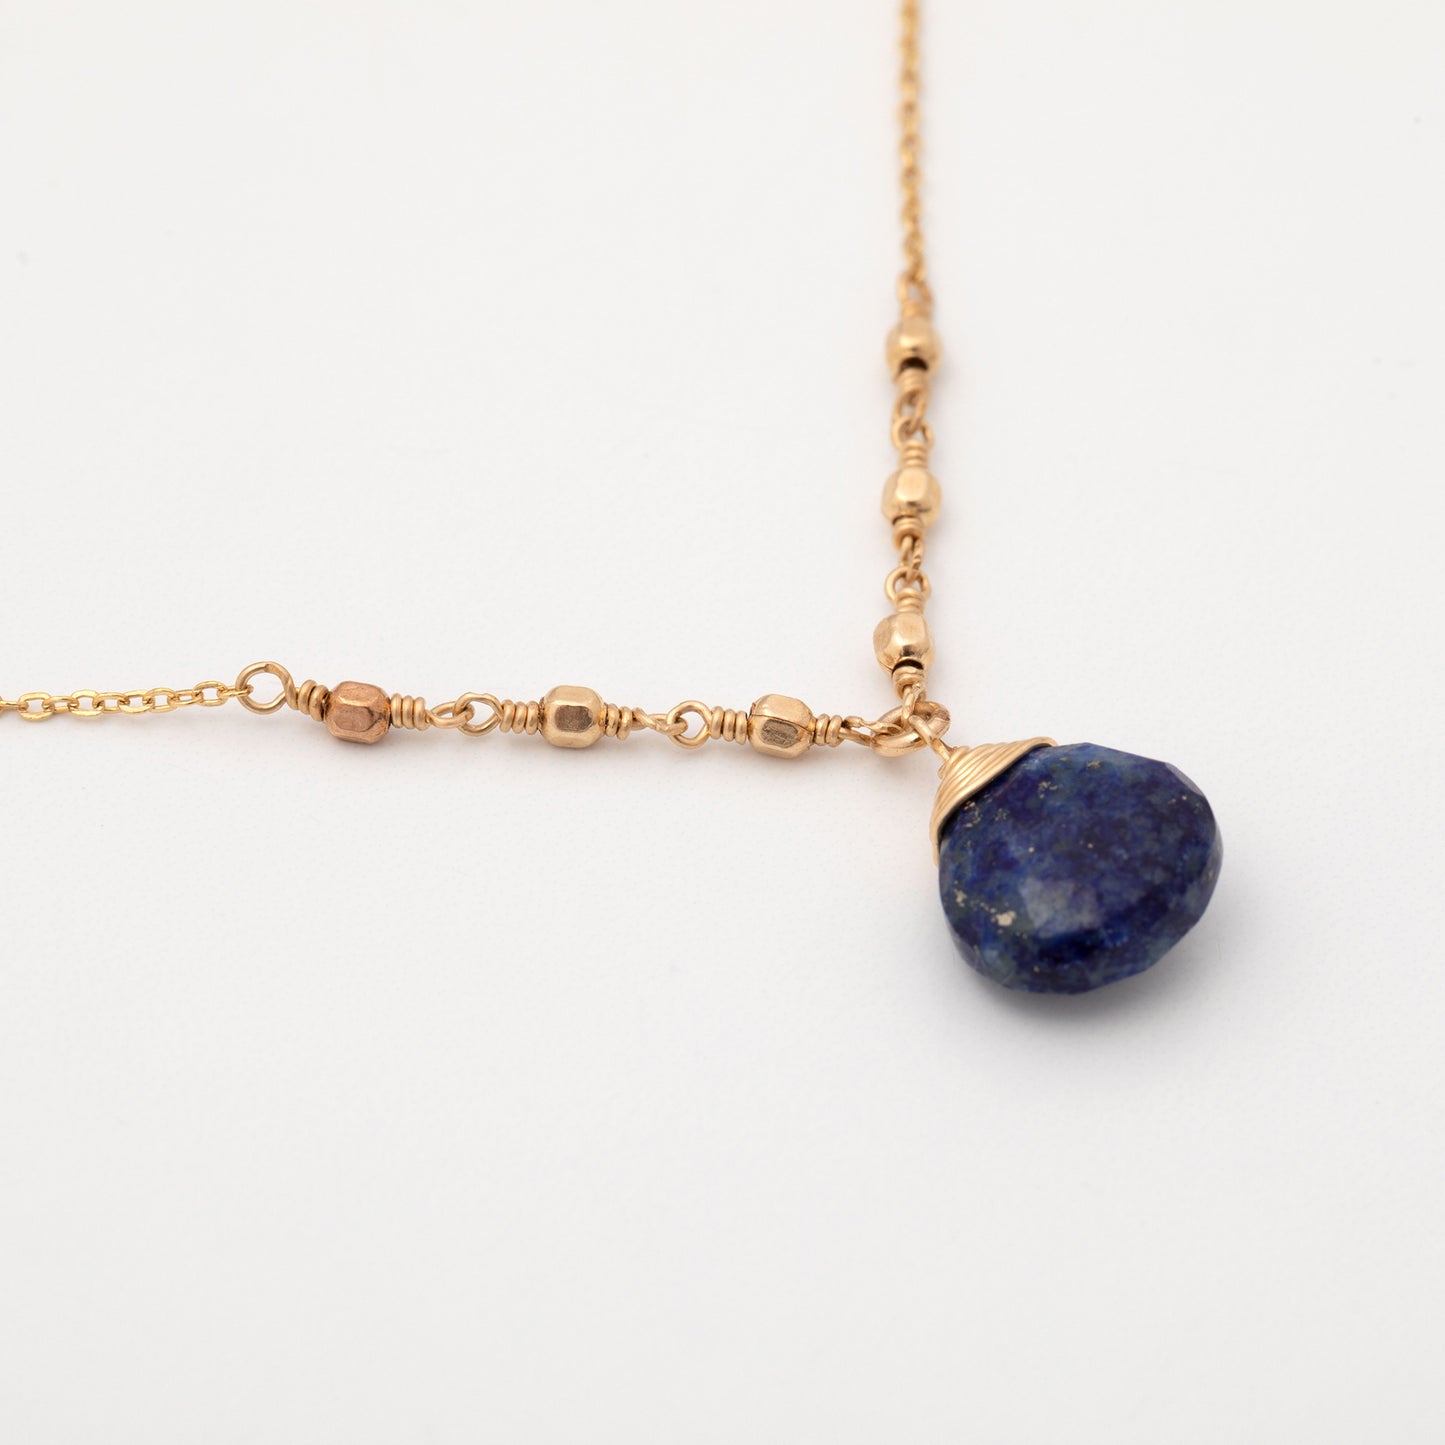 Gold Filled Necklace with Gemstone